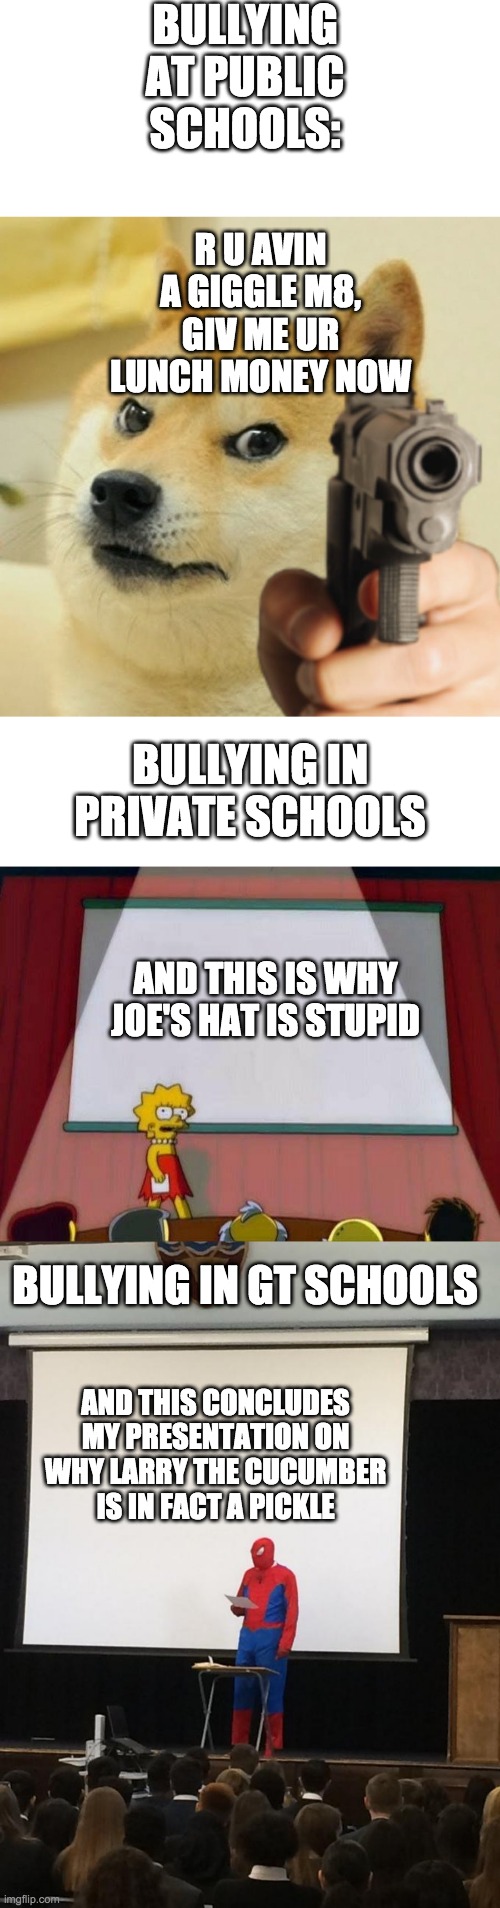 spent an hour on this tho | BULLYING AT PUBLIC SCHOOLS:; R U AVIN A GIGGLE M8, GIV ME UR LUNCH MONEY NOW; BULLYING IN PRIVATE SCHOOLS; AND THIS IS WHY JOE'S HAT IS STUPID; BULLYING IN GT SCHOOLS; AND THIS CONCLUDES MY PRESENTATION ON WHY LARRY THE CUCUMBER IS IN FACT A PICKLE | image tagged in blank white template,lisa powerpoint,spiderman presentation,doge holding a gun,funny,memes | made w/ Imgflip meme maker